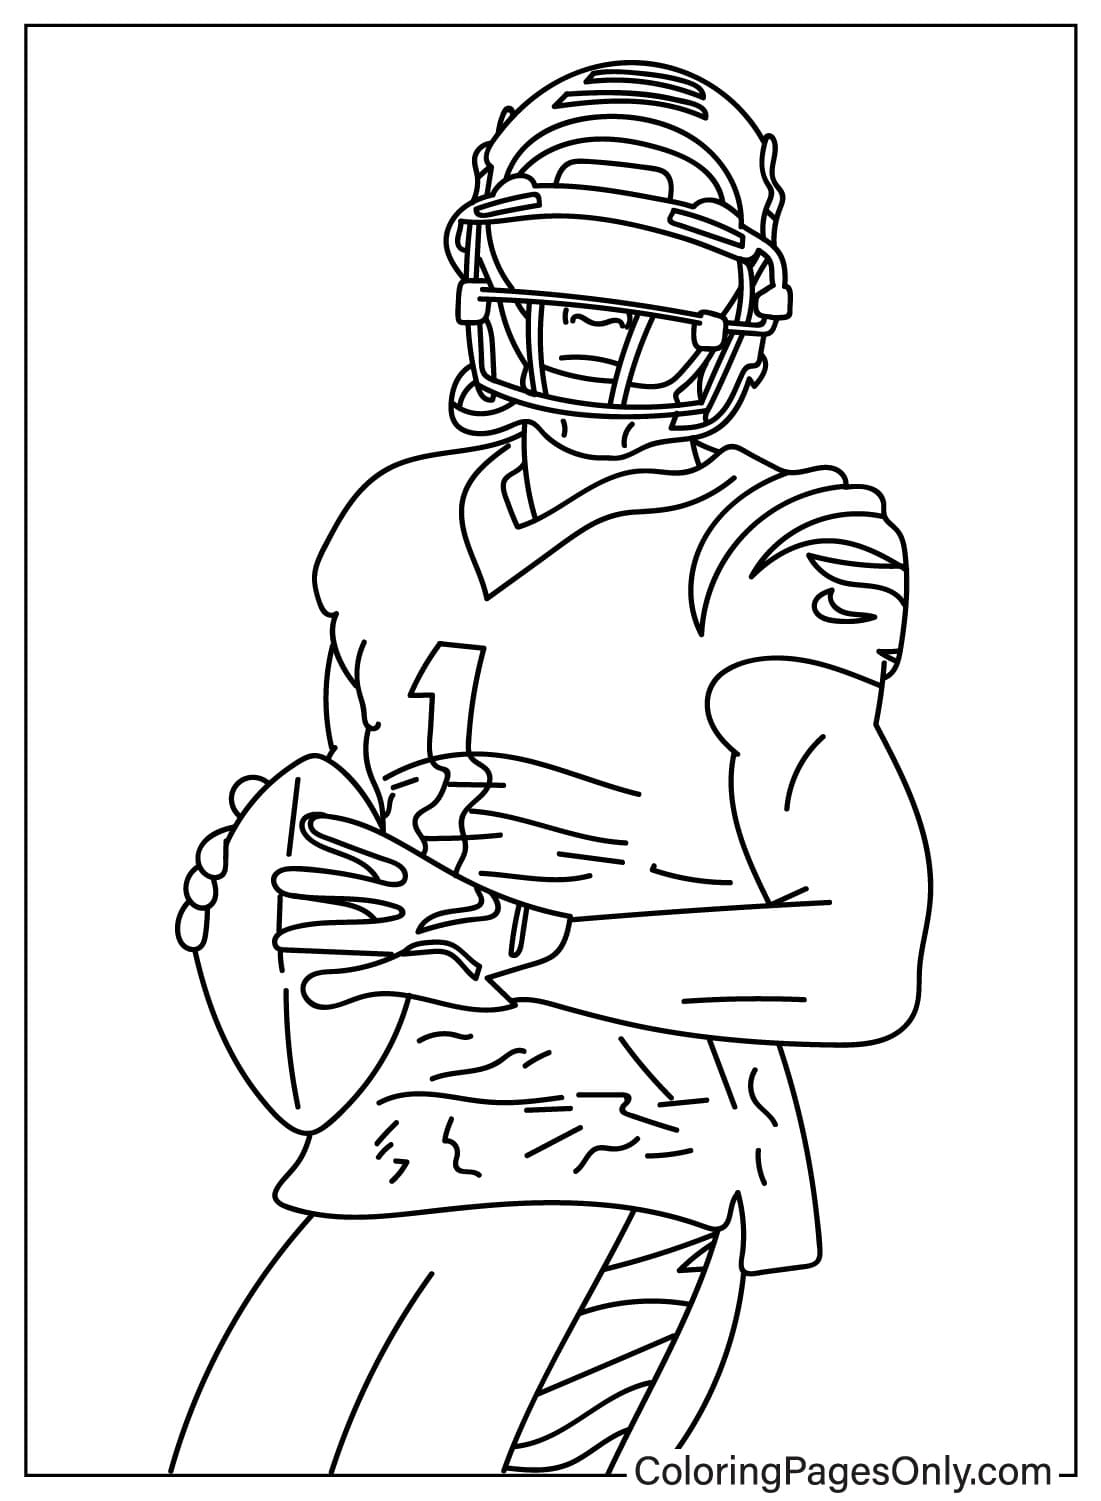 Free Ja’Marr Chase Coloring Page from Cincinnati Bengals